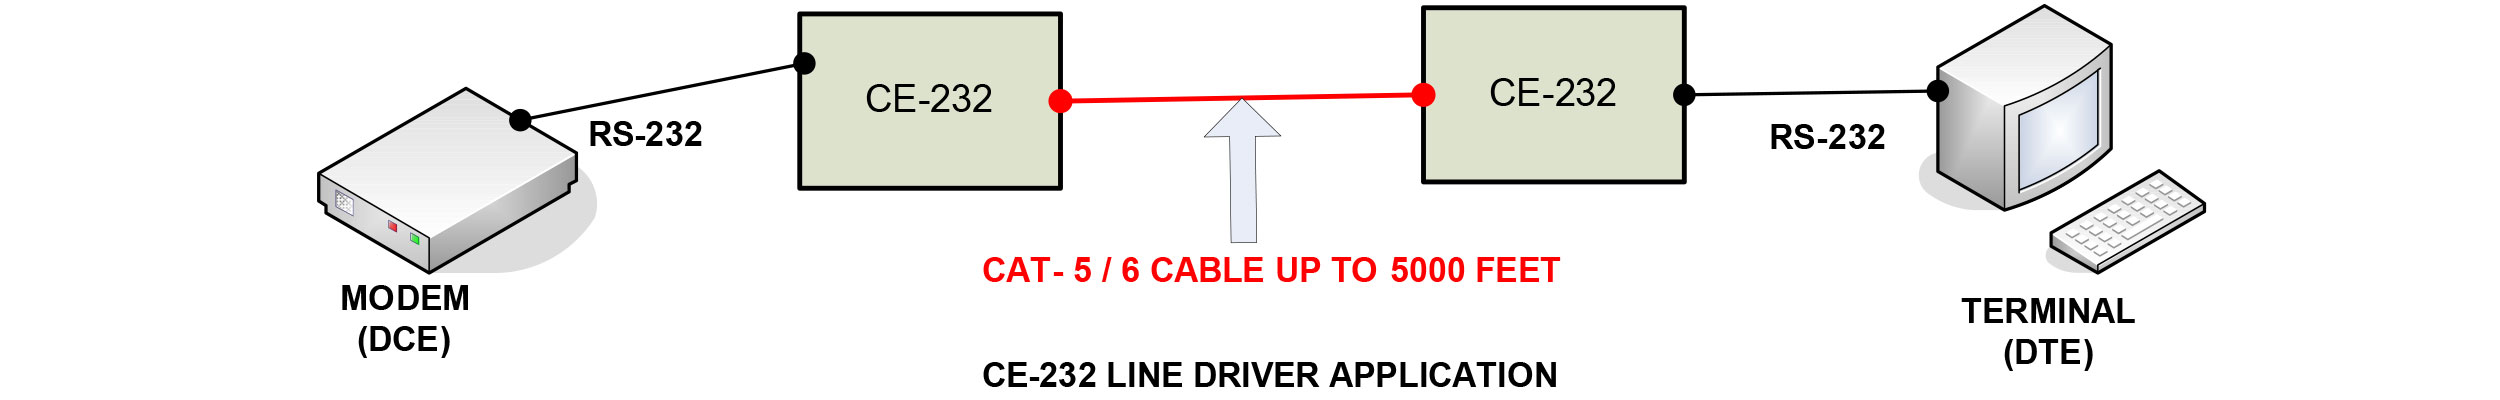 rs232 cable extender